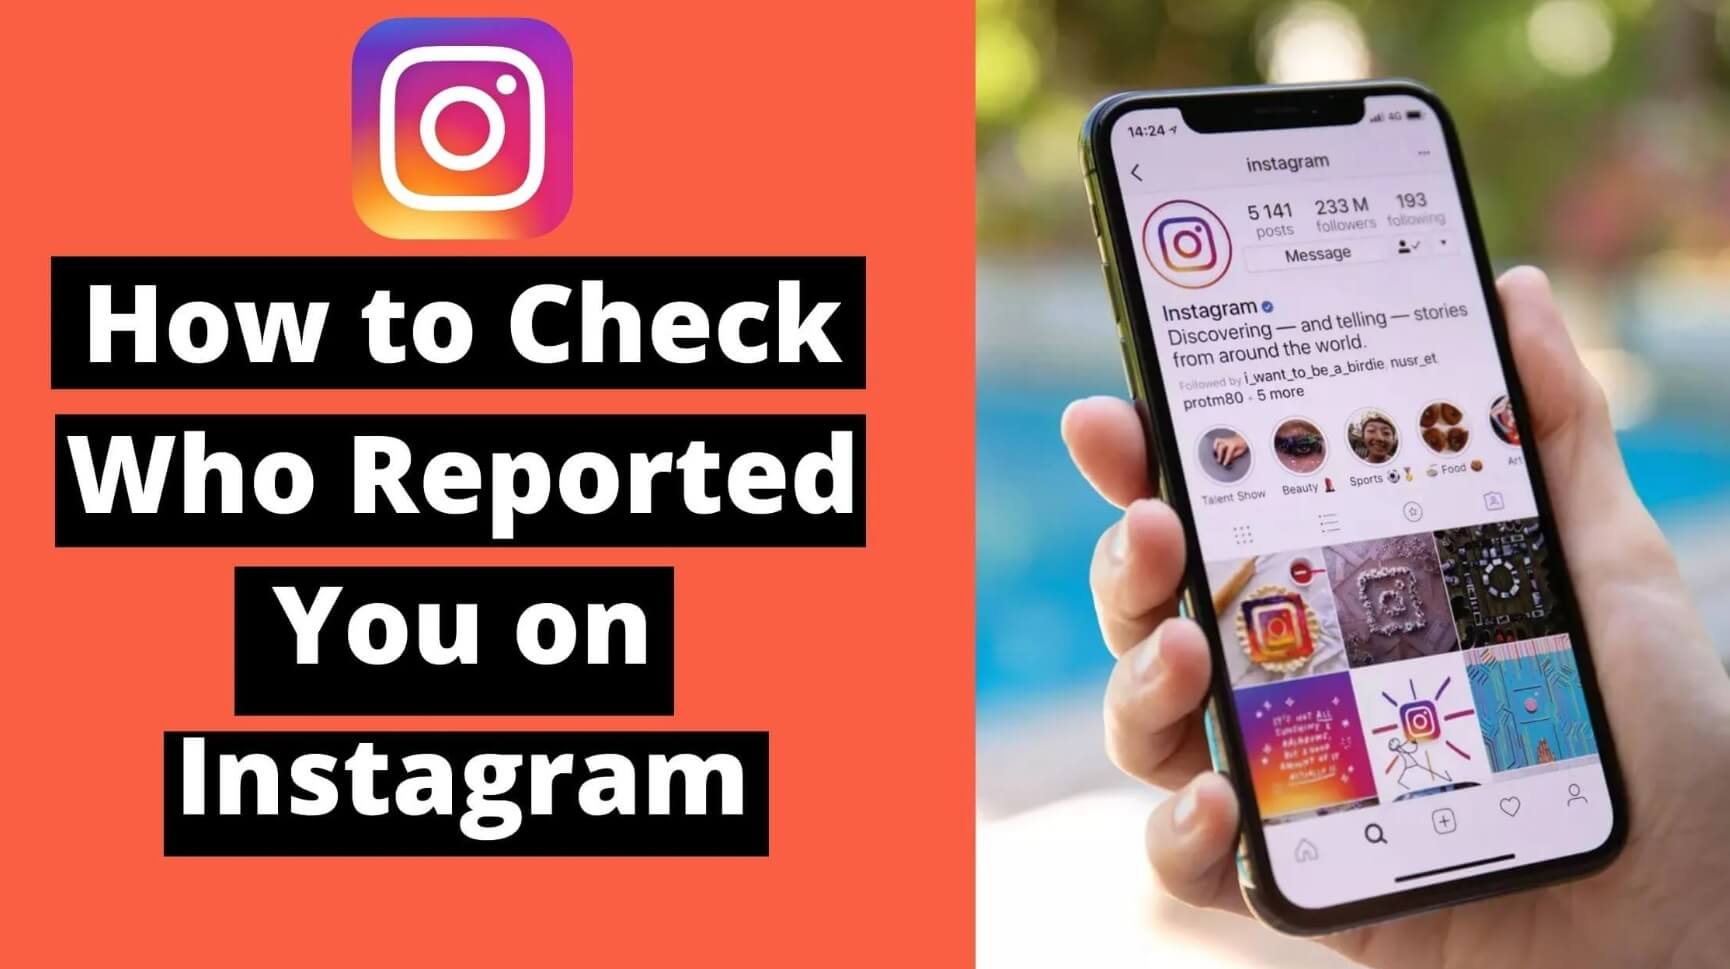 How to Know if Someone Reported You on Instagram